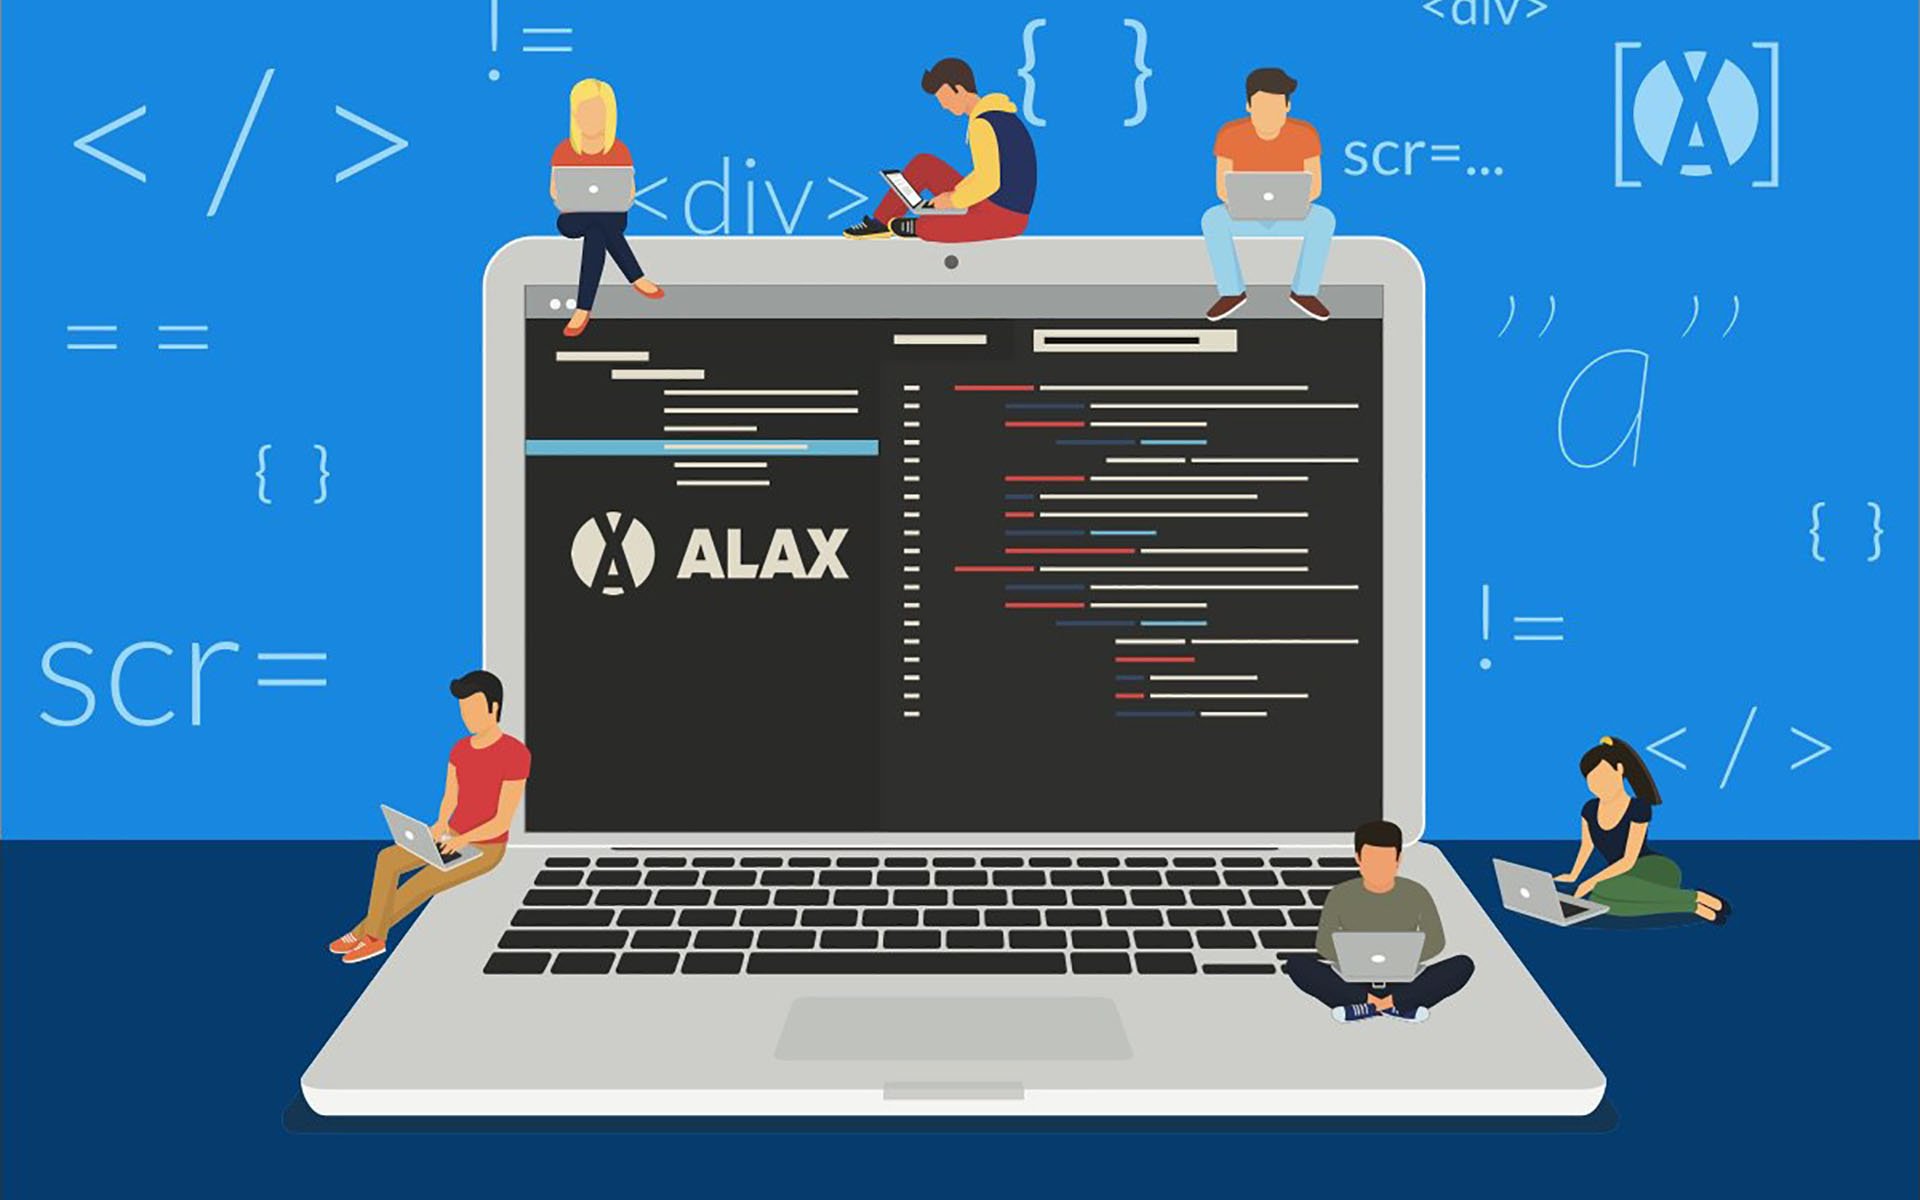 ALAX Presents Advantages for Game Developers